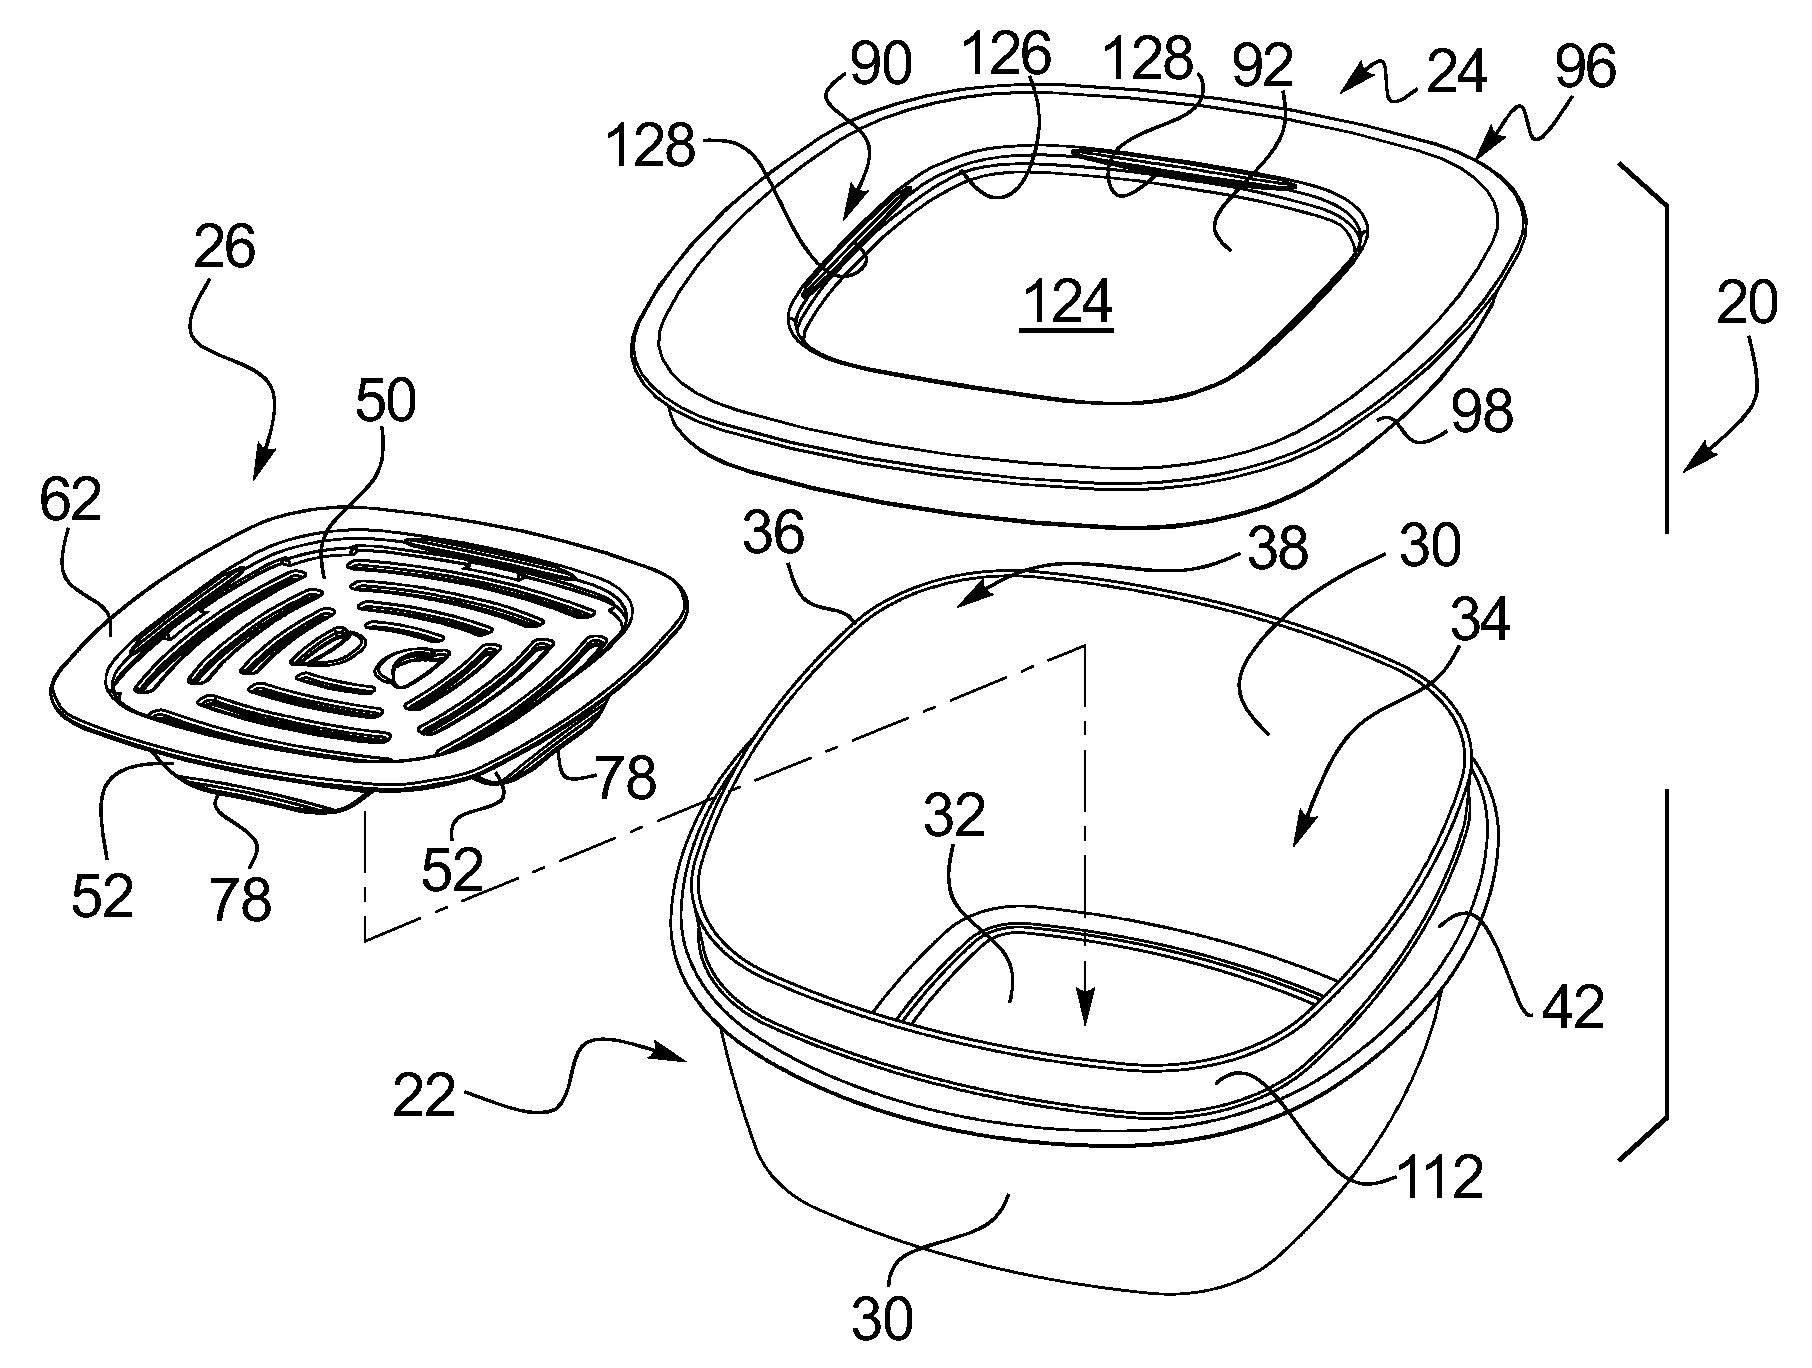 Food storage container and container system